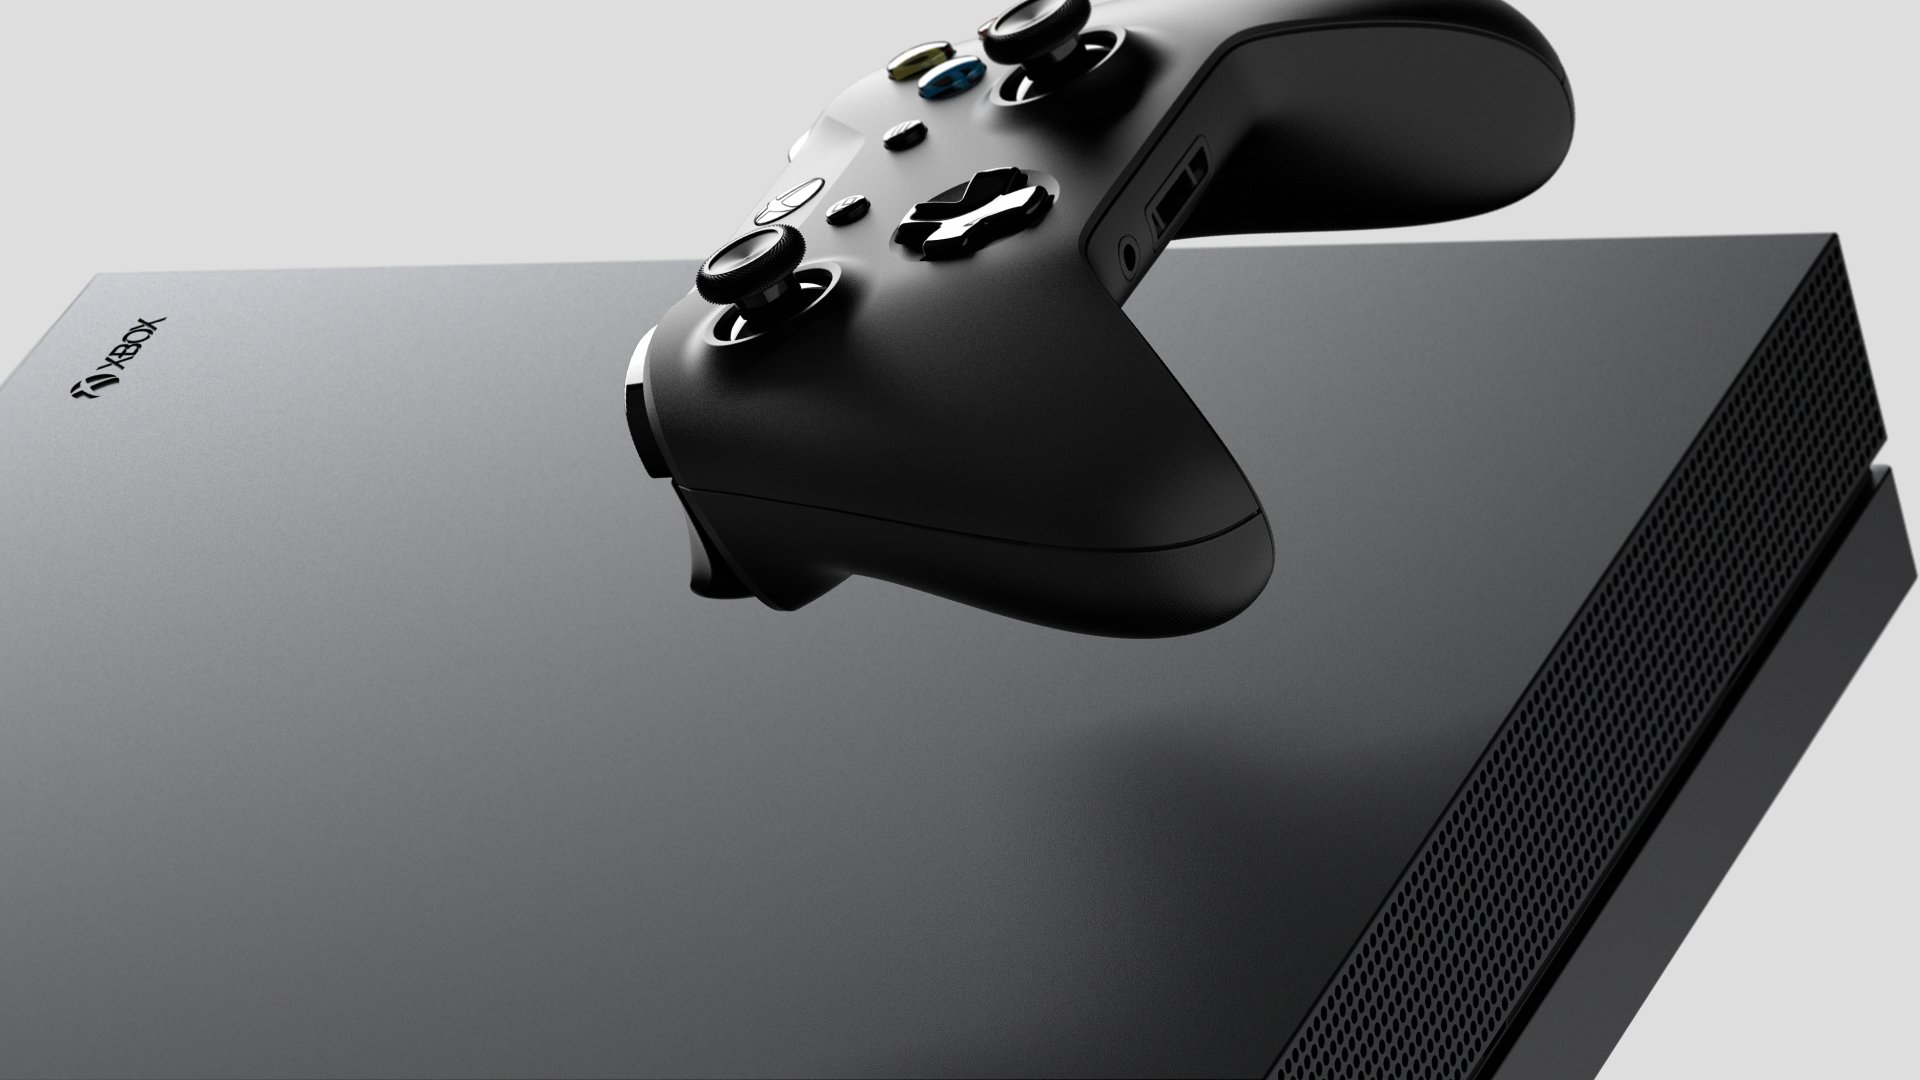 Microsoft ends production of the Xbox One as focus turns to new consoles –  GeekWire